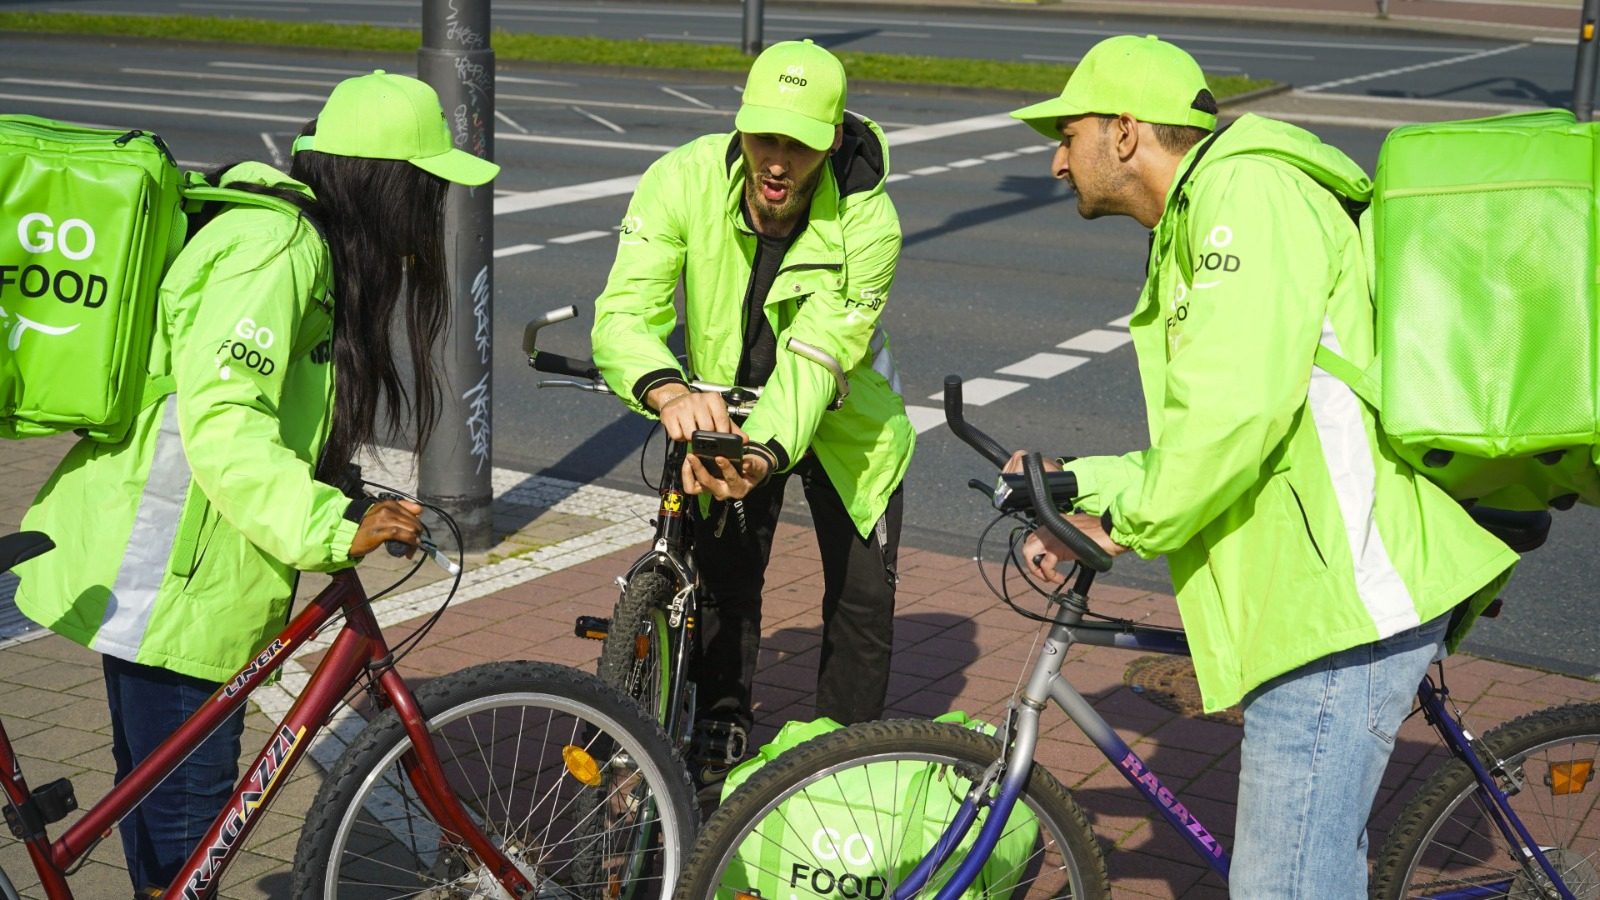 Three GO FOOD delivery workers with bicycles at a street corner, one using a mobile device, likely coordinating their next delivery.